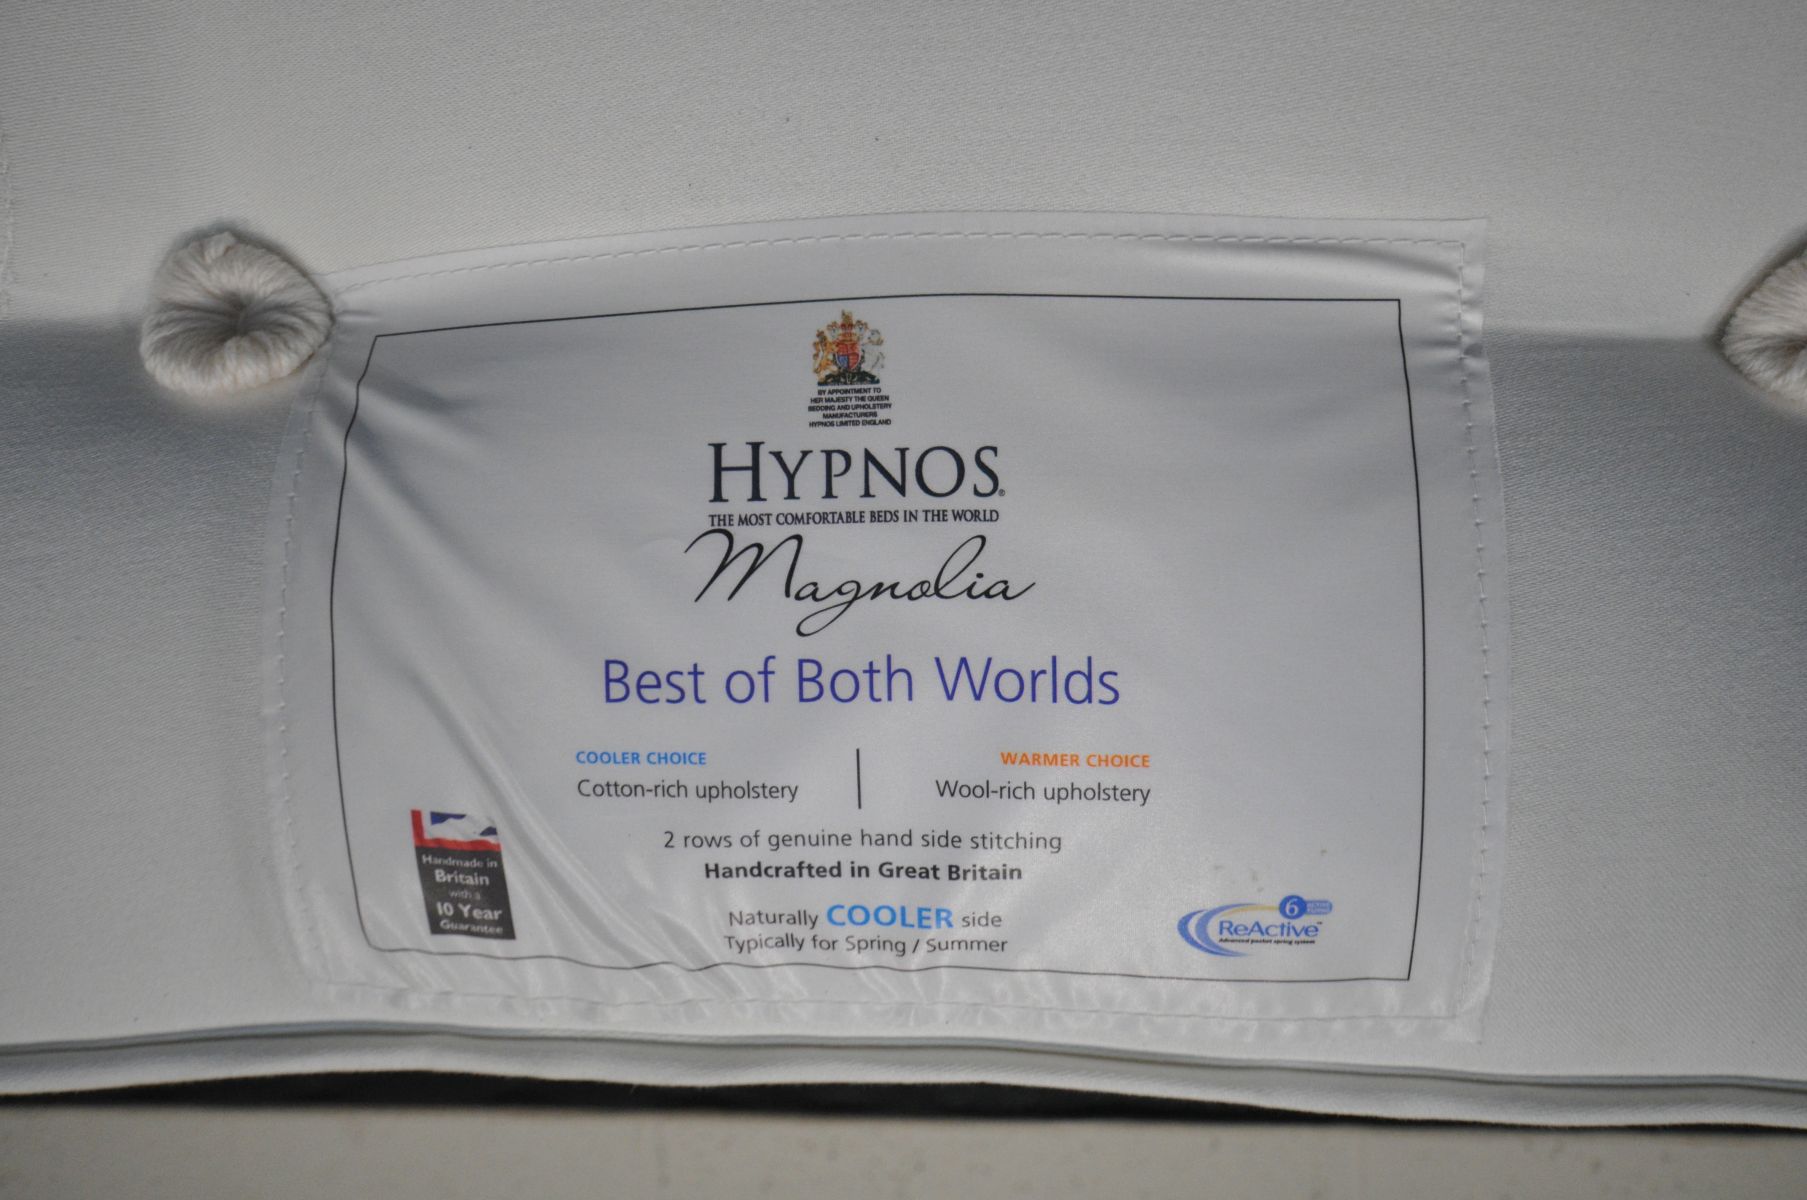 A 4FT6 DIVAN BED AND HYPNOS 'BEST OF BOTH WORLDS' MATTRESS, and a buttoned headboard - Image 3 of 3